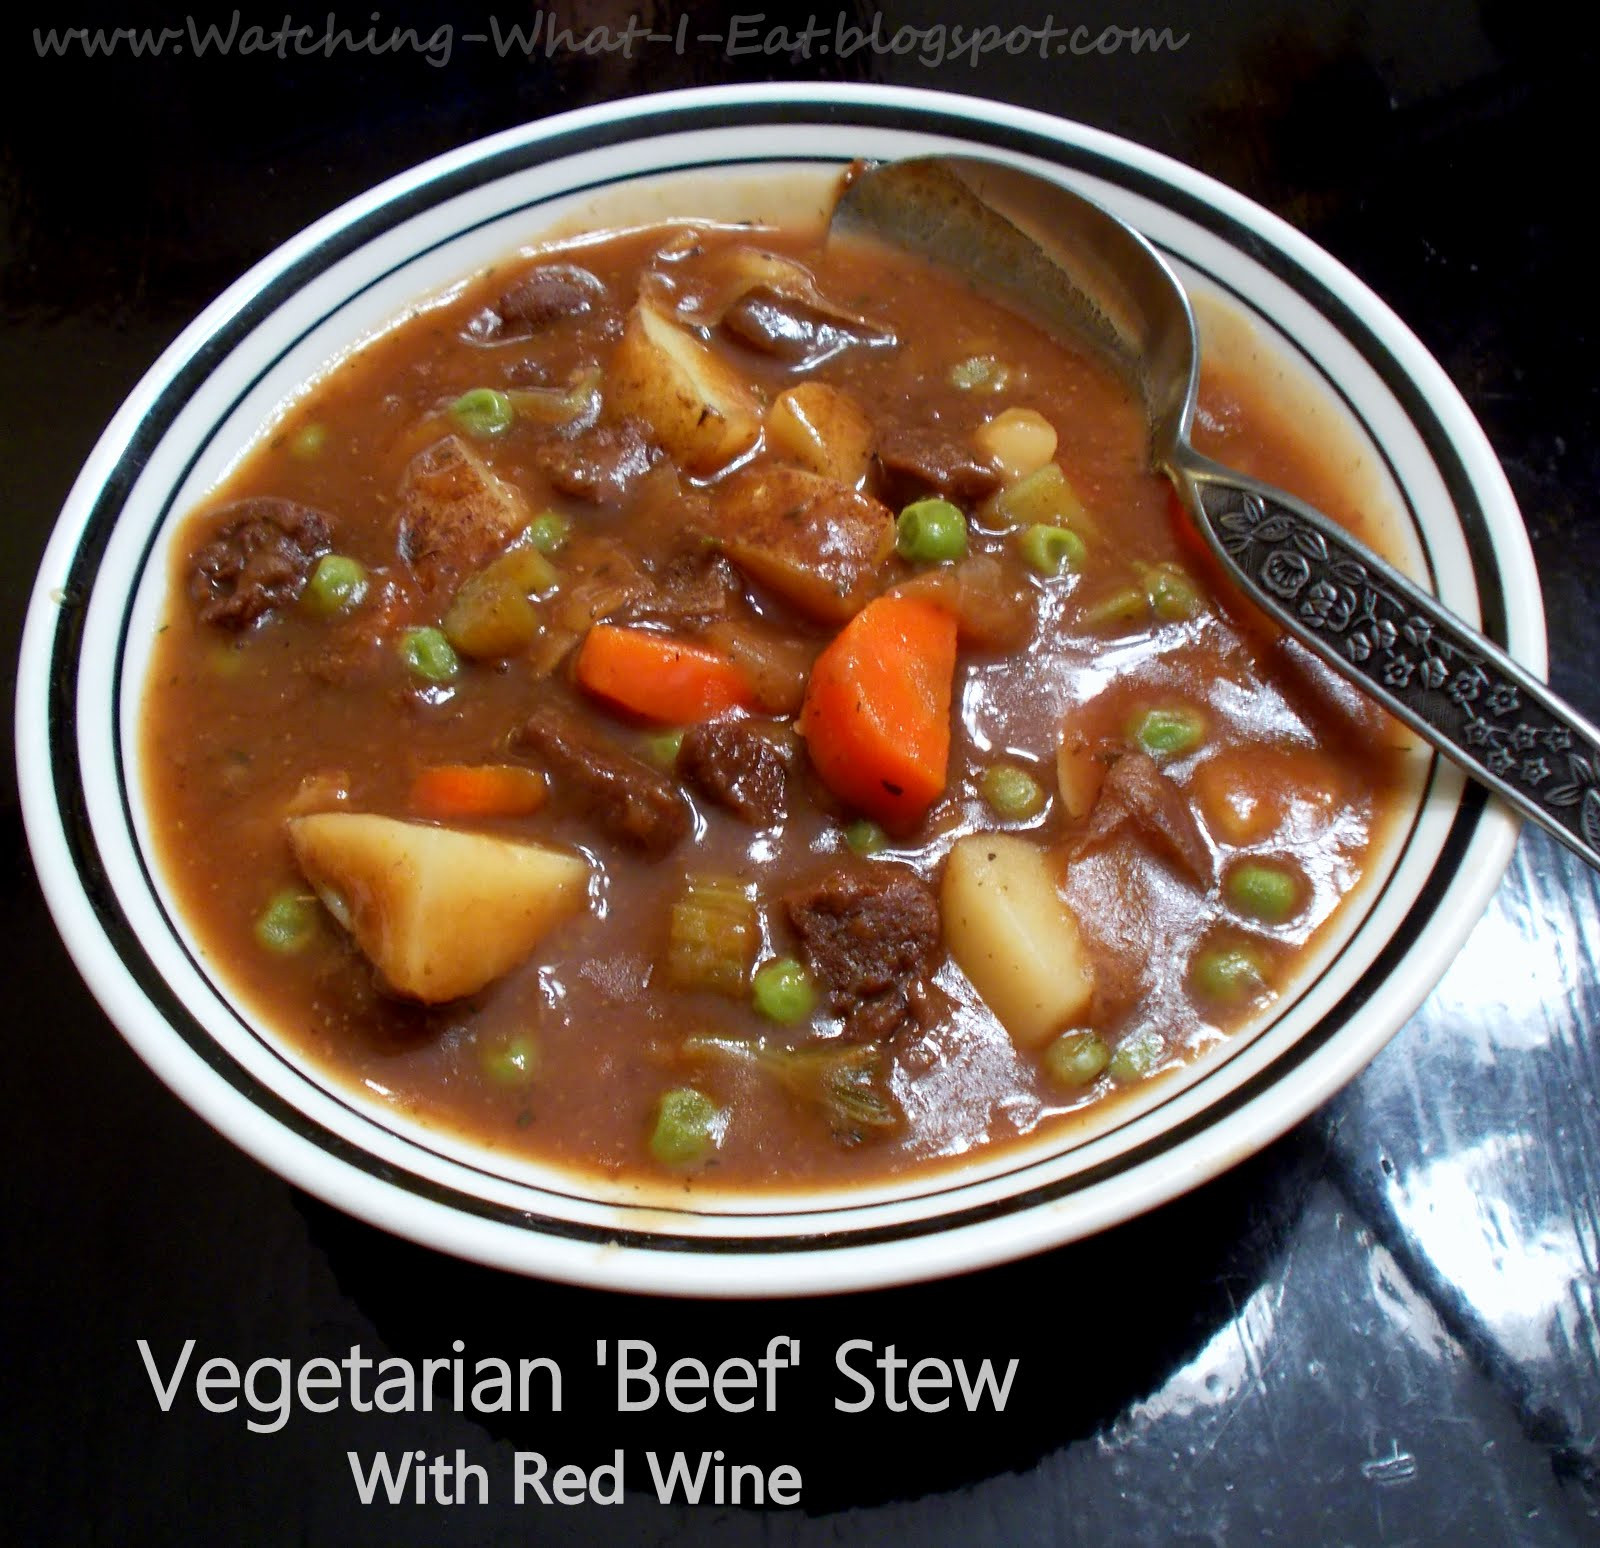 Vegan Beef Stew
 Watching What I Eat Ve arian Beef Stew with Red Wine